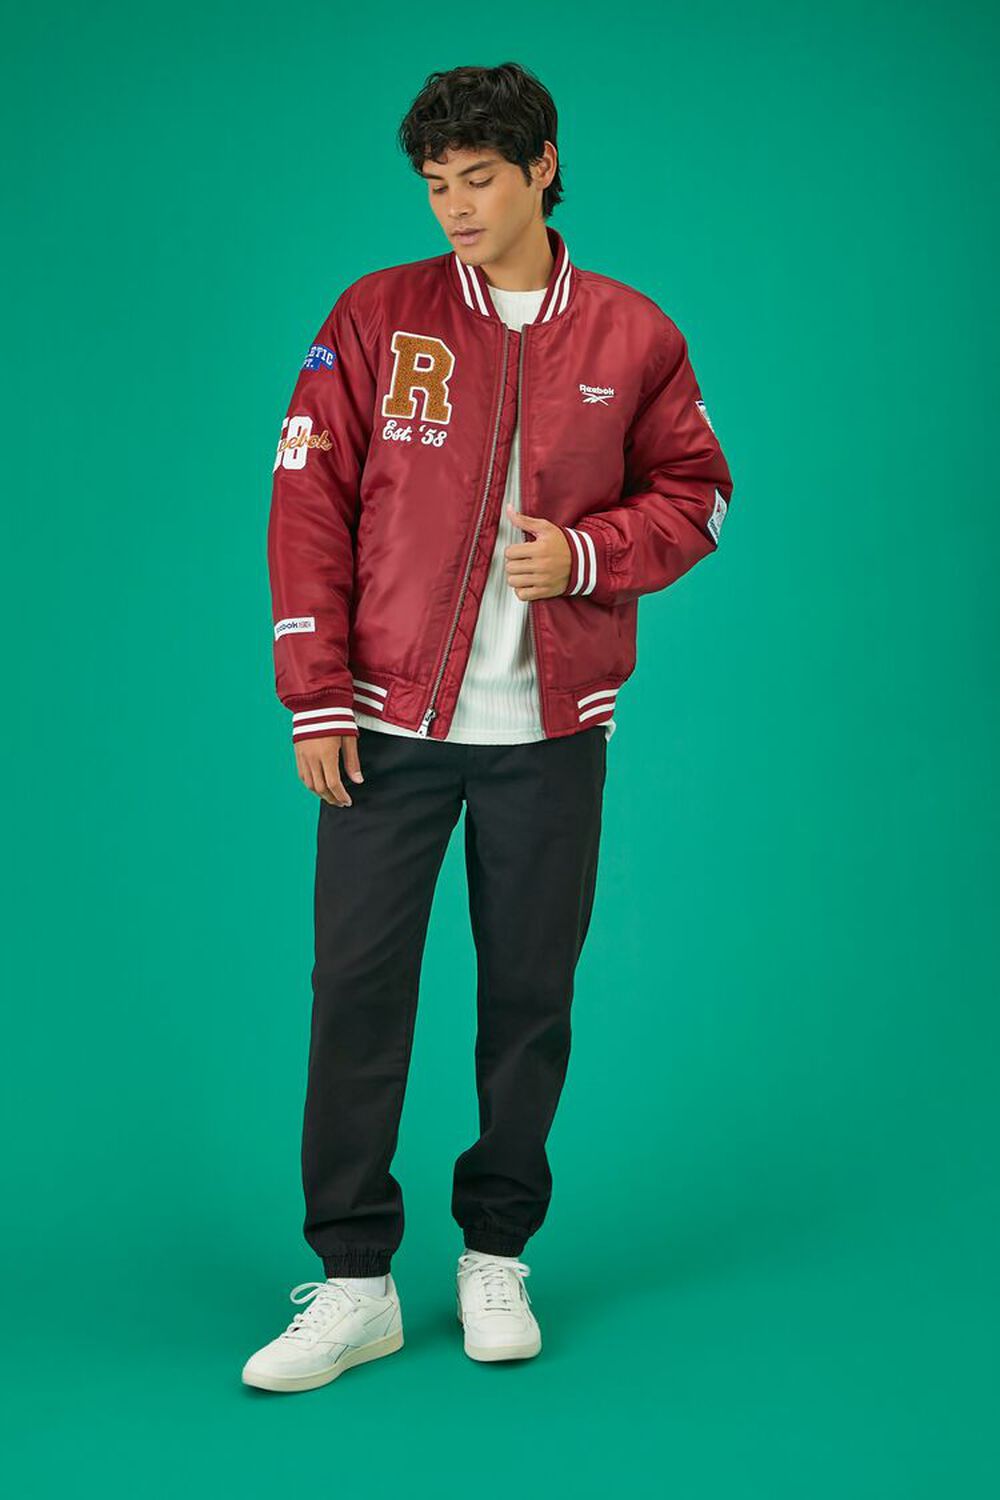 Burgundy Varsity Jacket Outfits For Men (54 ideas & outfits)